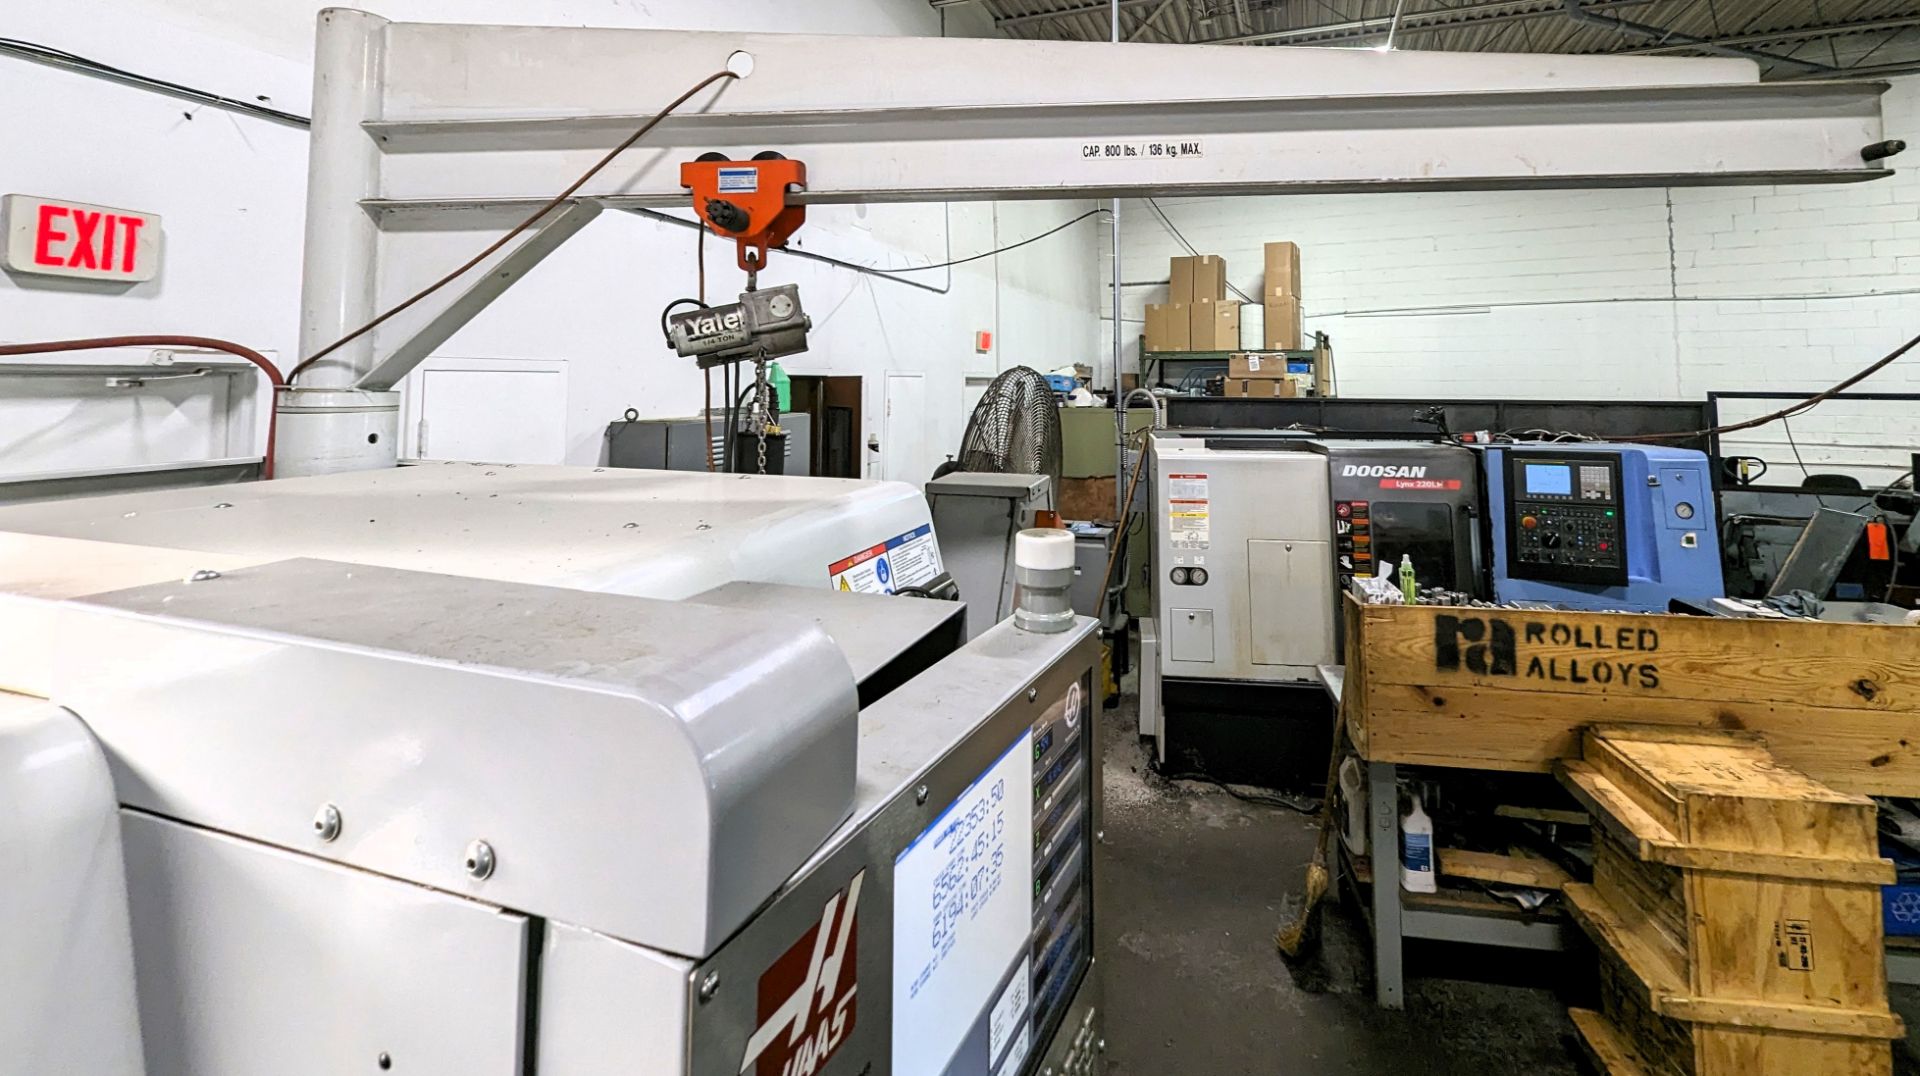 2008 HAAS SL-30TB CNC TURNING CENTER, CNC CONTROL, 15” CHUCK, BIG BORE, TAILSTOCK, TOOL SETTER, CHIP - Image 12 of 13